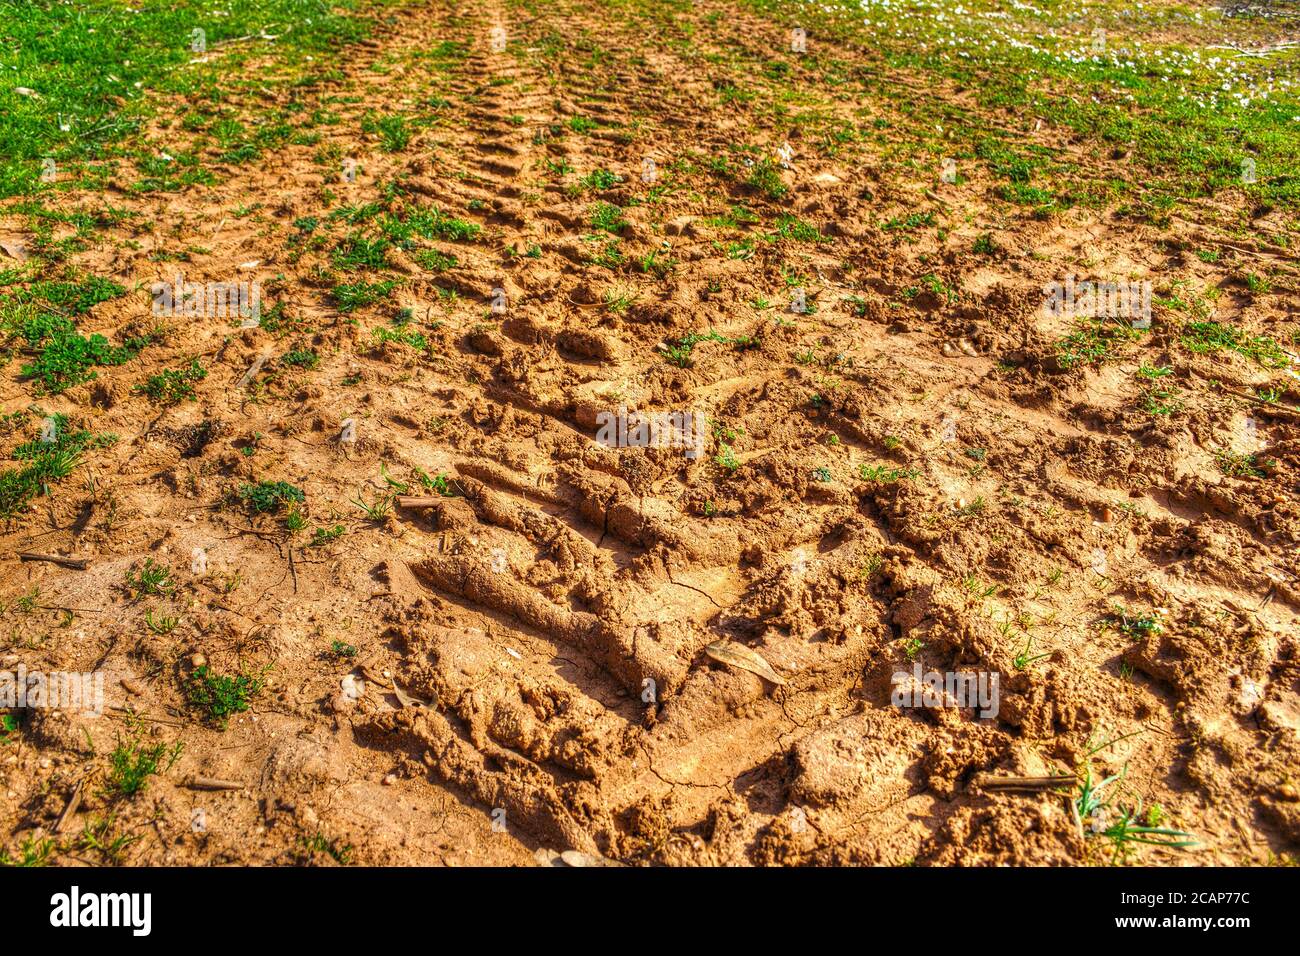 Wet Mud On The Ground With Grass In Nature Stock Photo, Picture and Royalty  Free Image. Image 80885384.